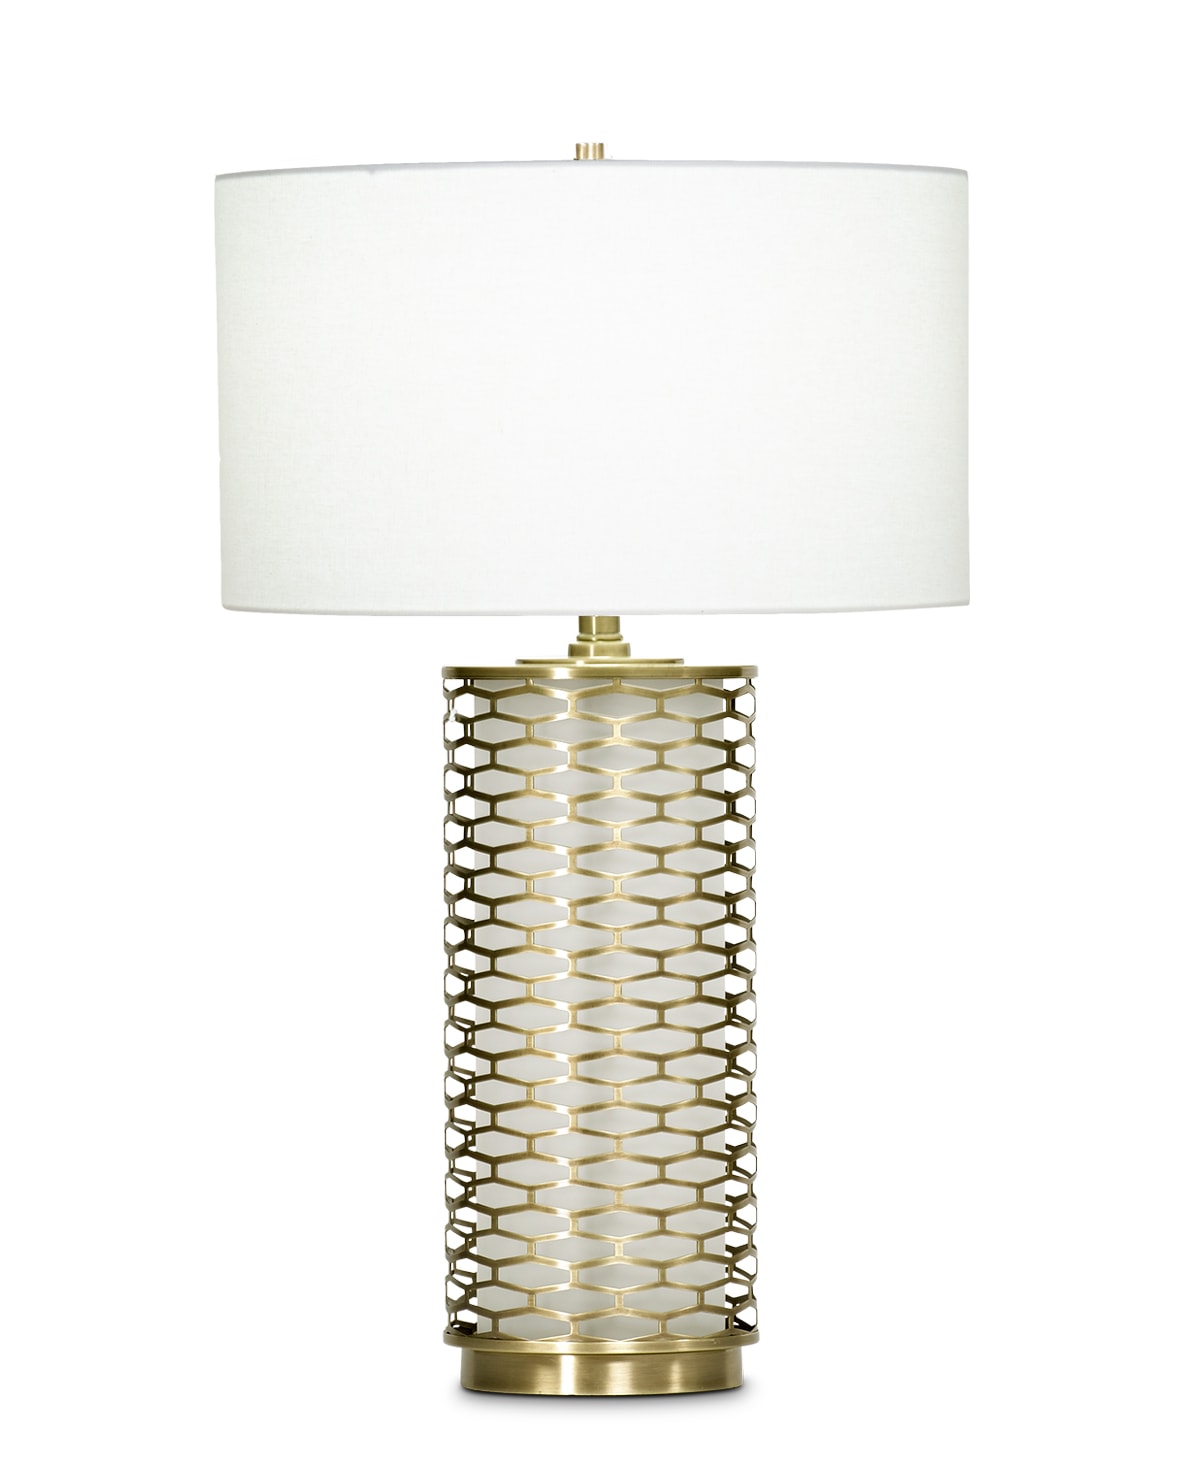 FlowDecor Marigold Table Lamp in metal with antique brass finish and glass with frosted finish and off-white linen drum shade (# 3714)